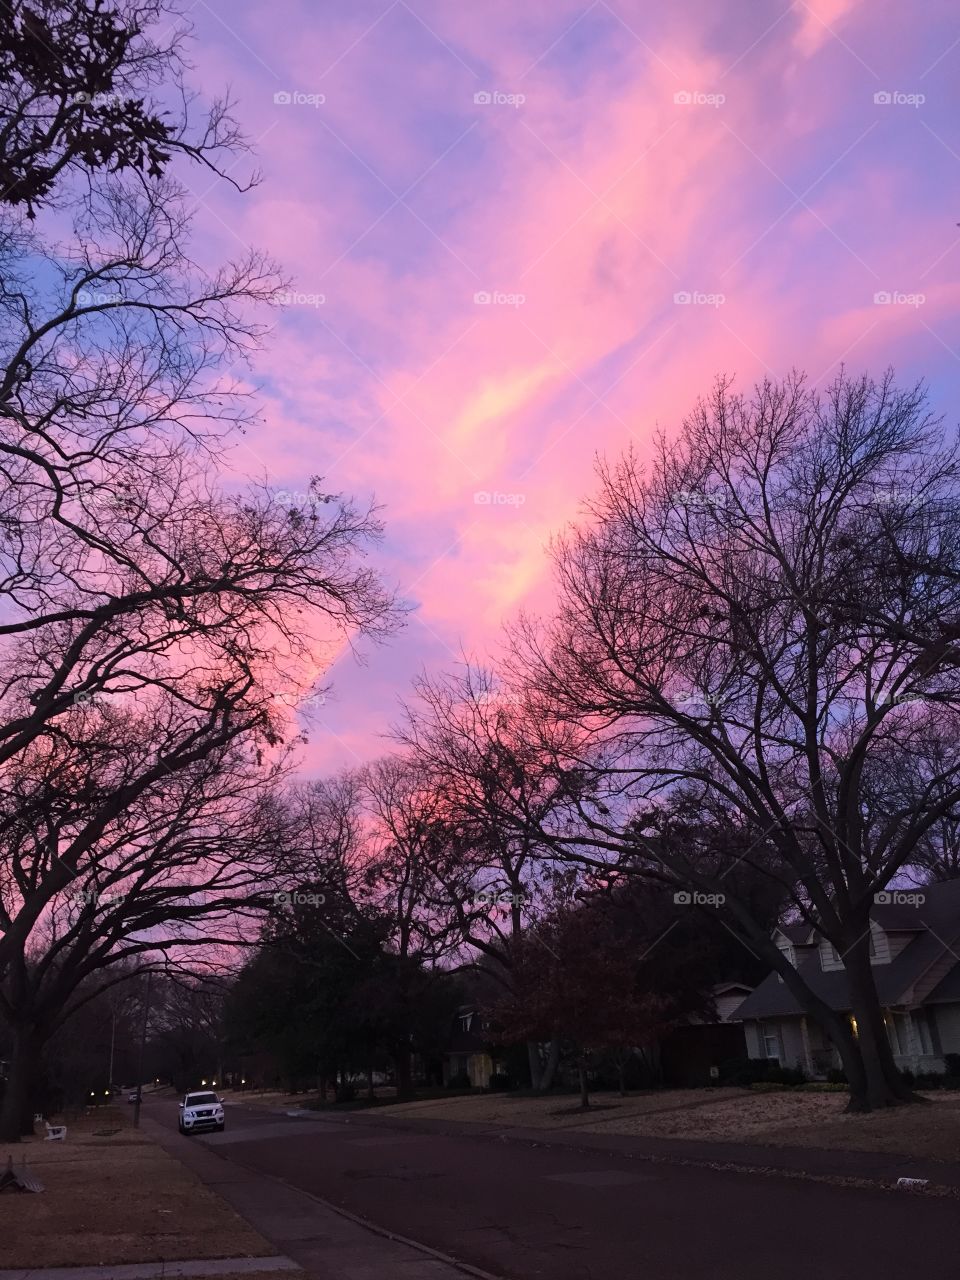 pink and purple Dallas sunset skies make up for barren winter trees